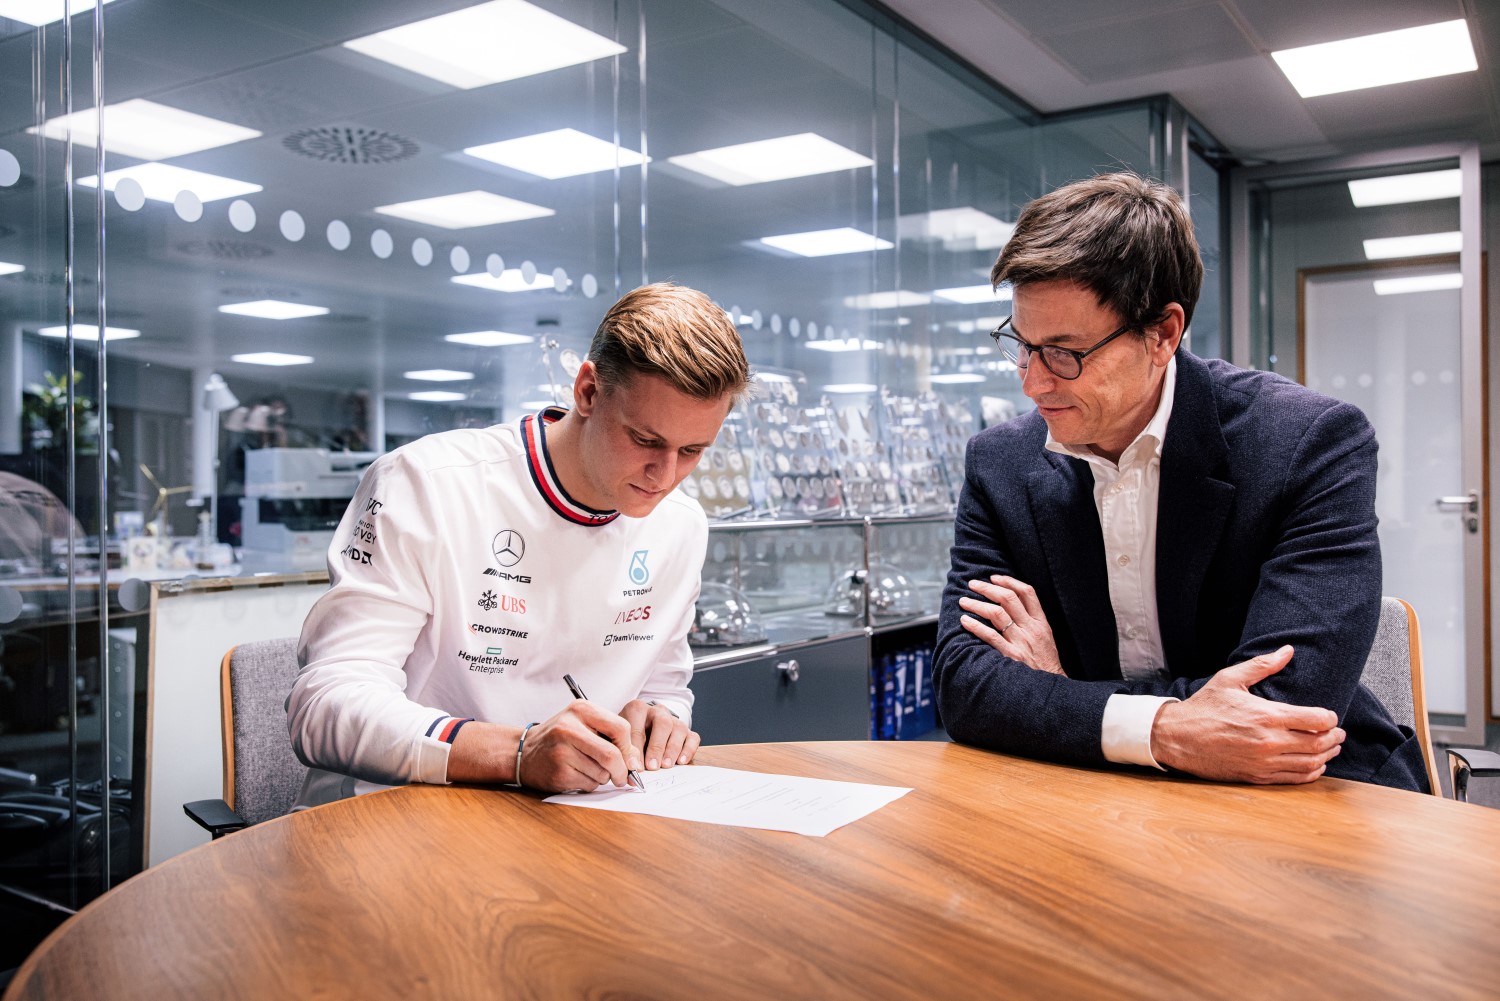 Mercedes-AMG PETRONAS F1 Team signs Mick Schumacher as Reserve Driver for 2023 as Team Boss Toto Wolff watches